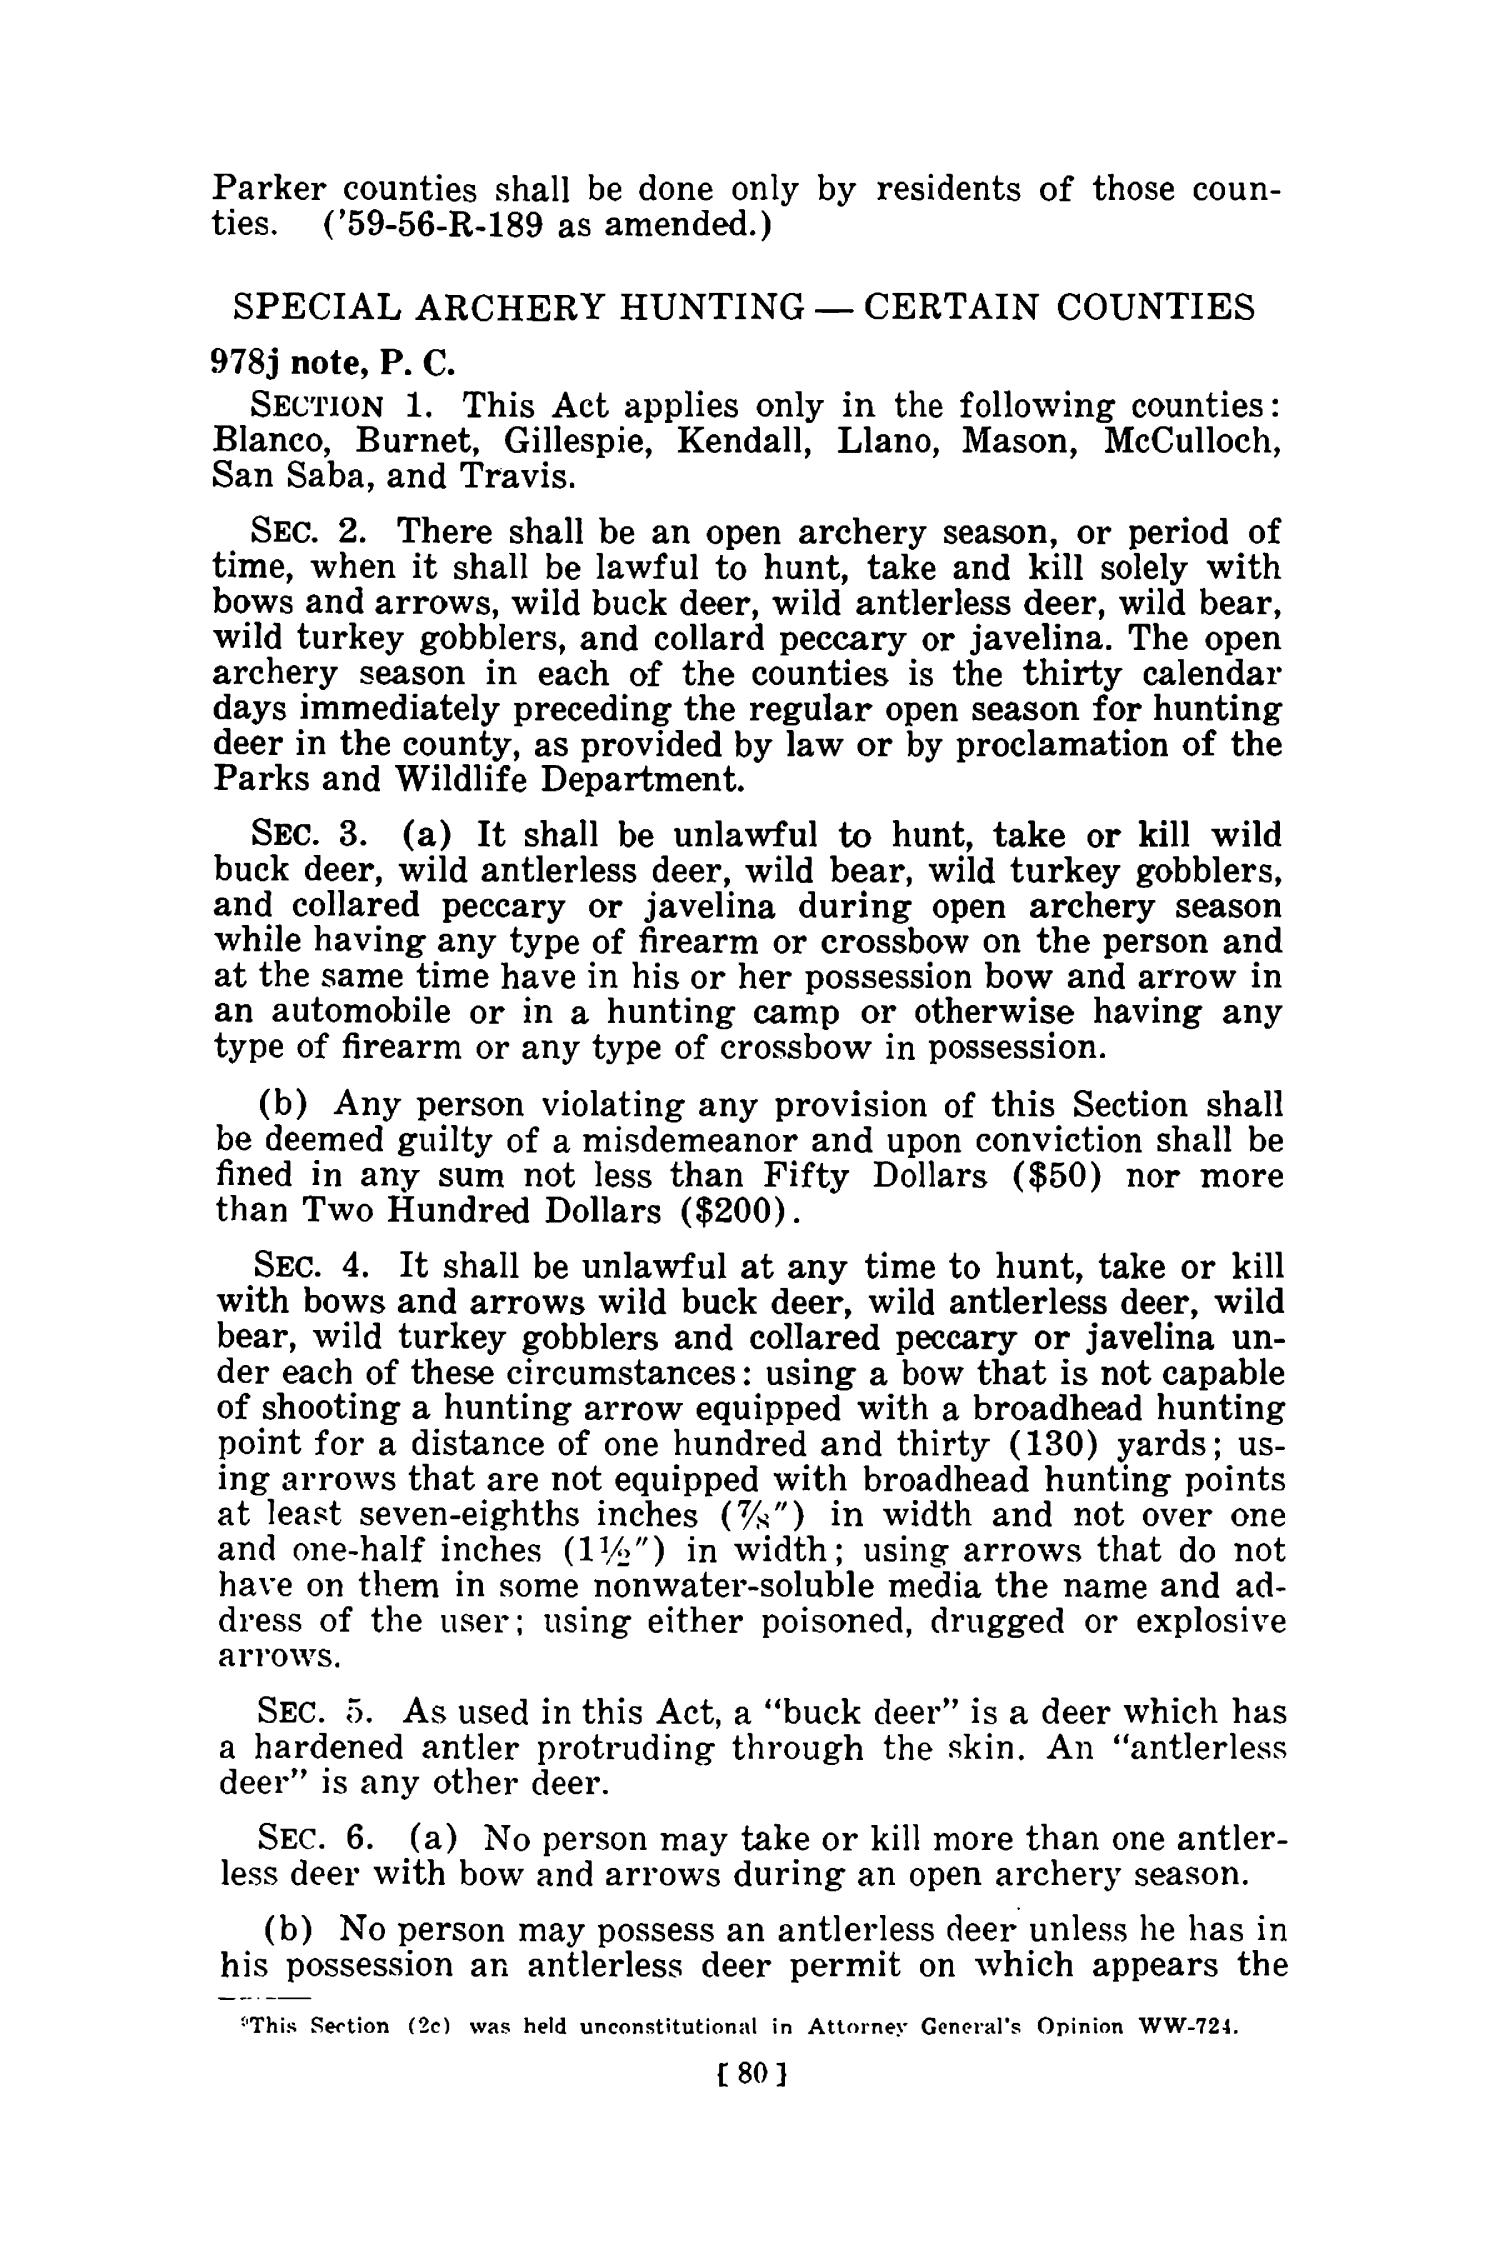 Full Text of the Game, Fish and Fur Laws of Texas with citations of Park Laws, 1965
                                                
                                                    80
                                                